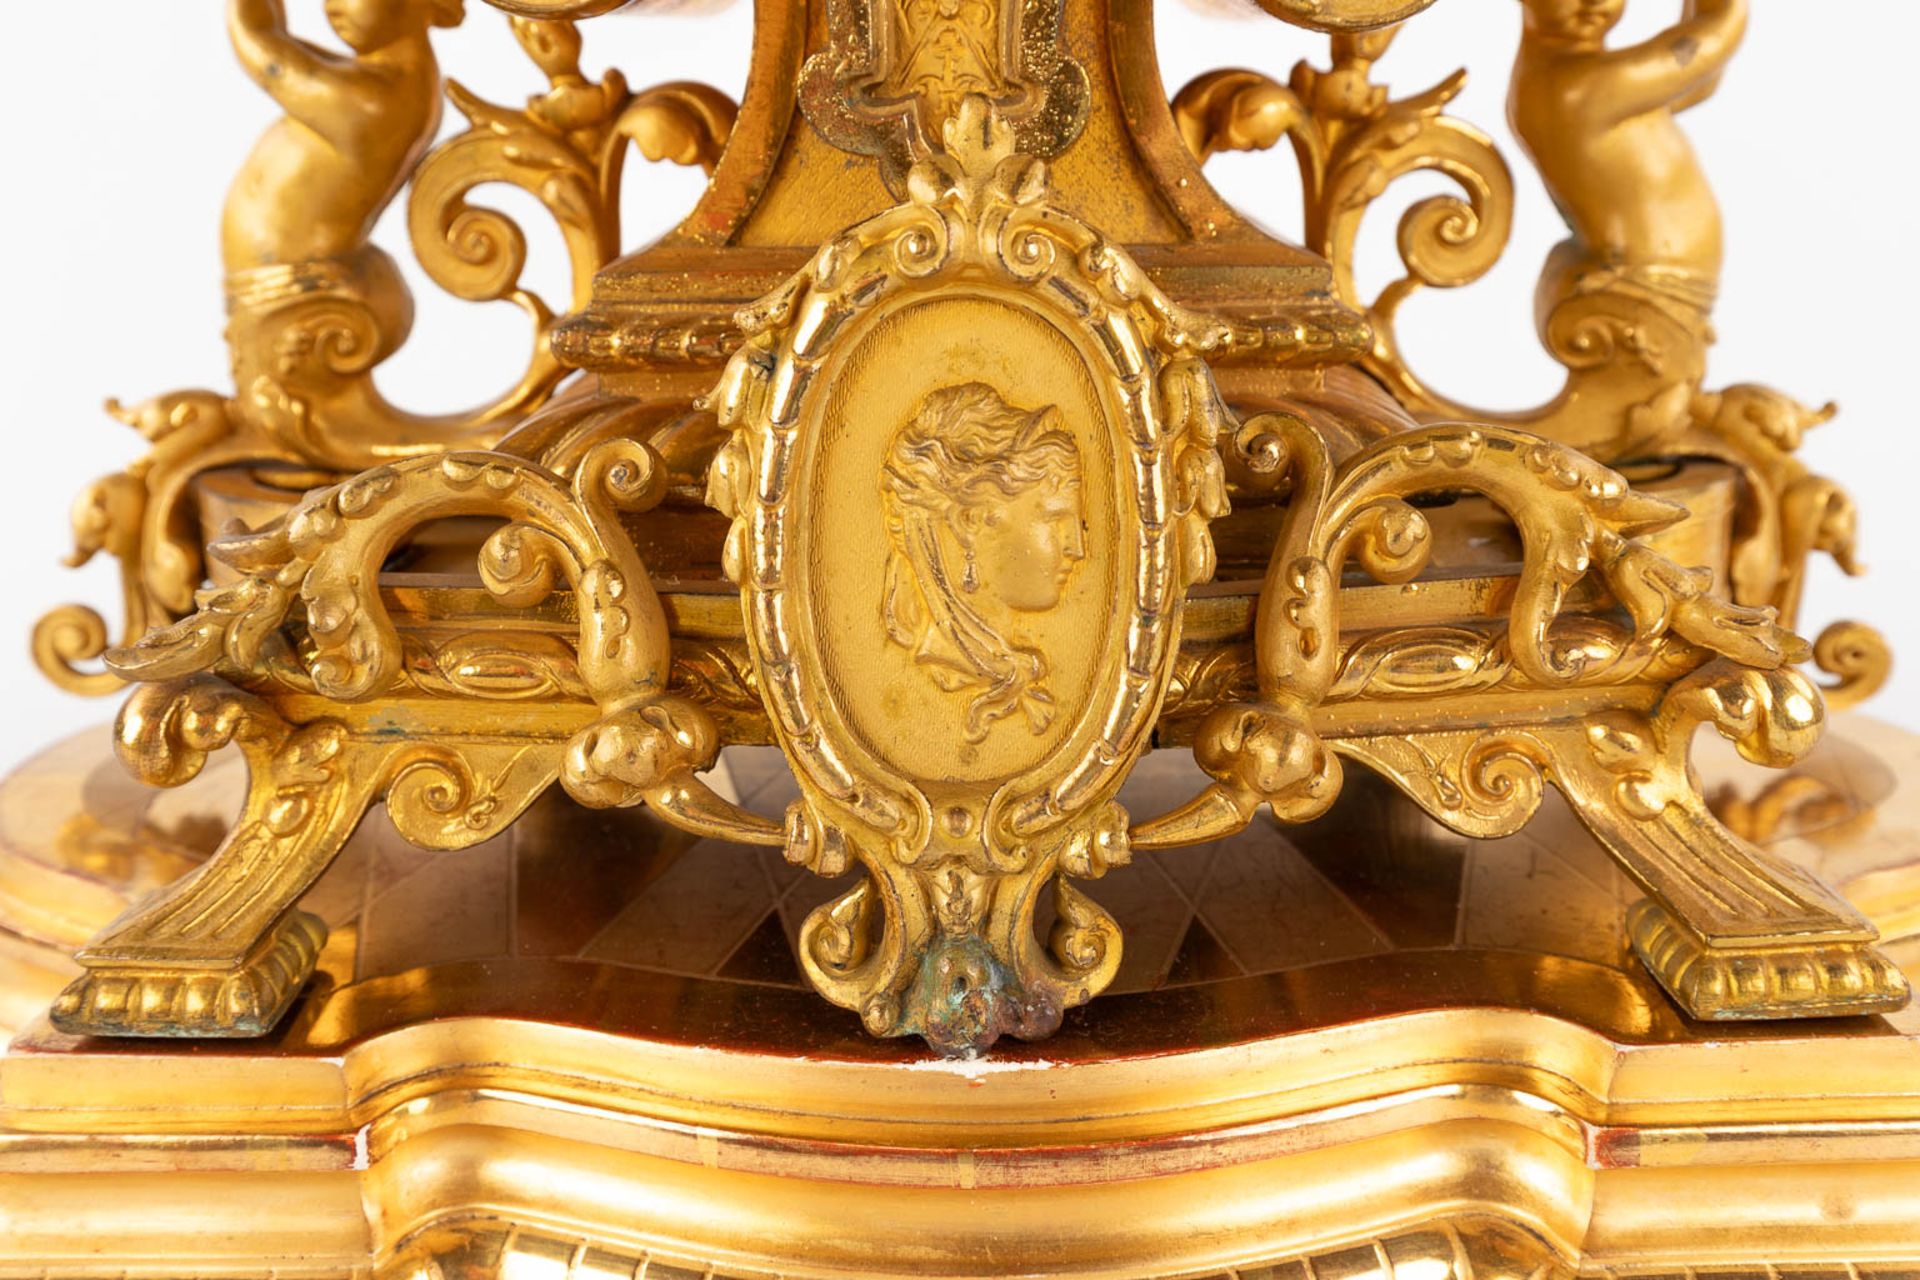 A three-piece mantle garniture clock and candelabra, gilt spelter, decorated with putti. Circa 1900. - Image 16 of 19